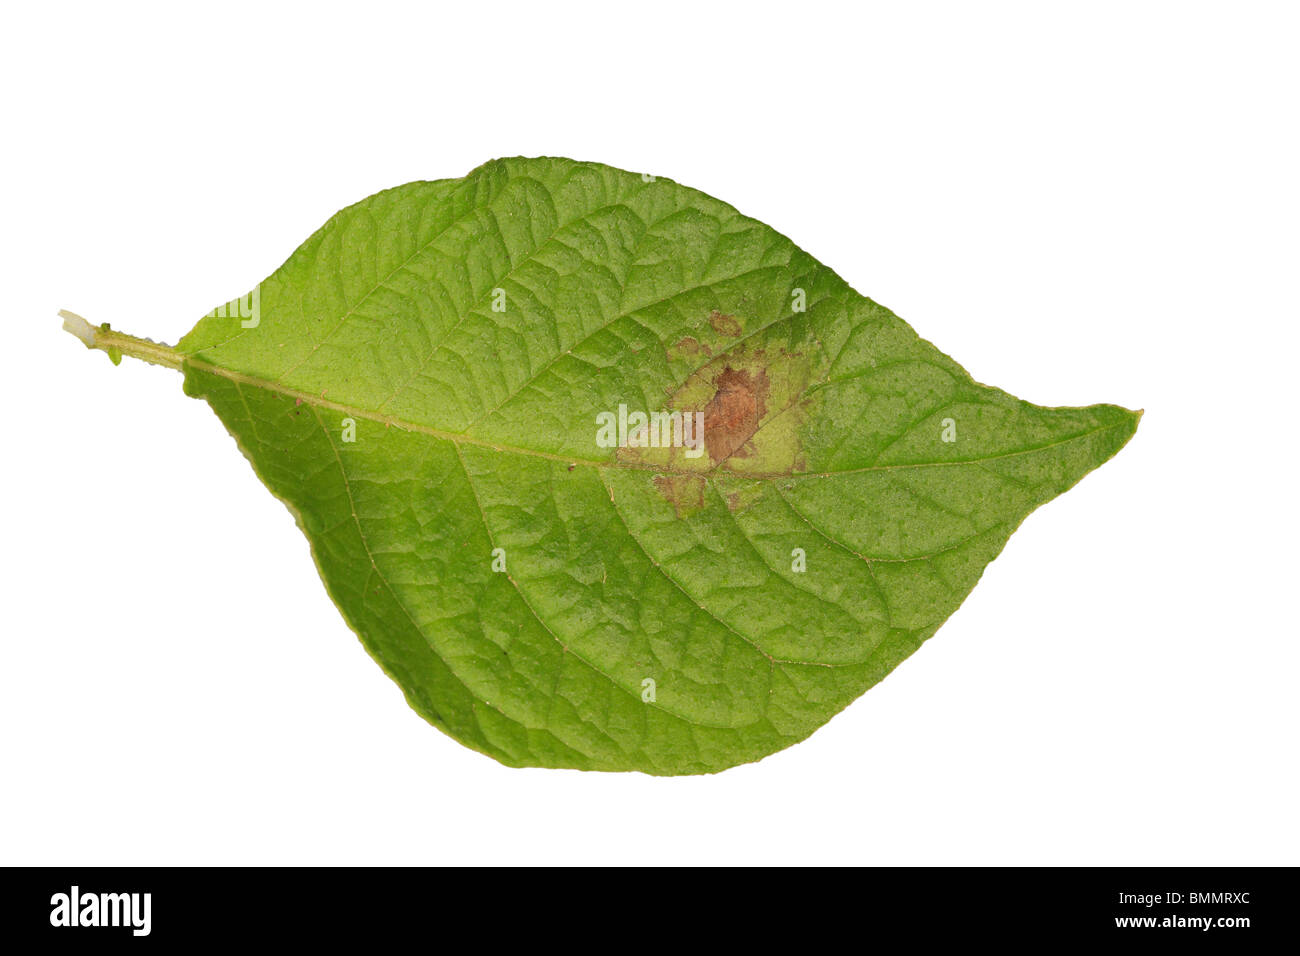 POTATO BLIGHT (Phytophthora infestans) CLOSE UP OF UPPER SURFACE OF INFECTED LEAF Stock Photo